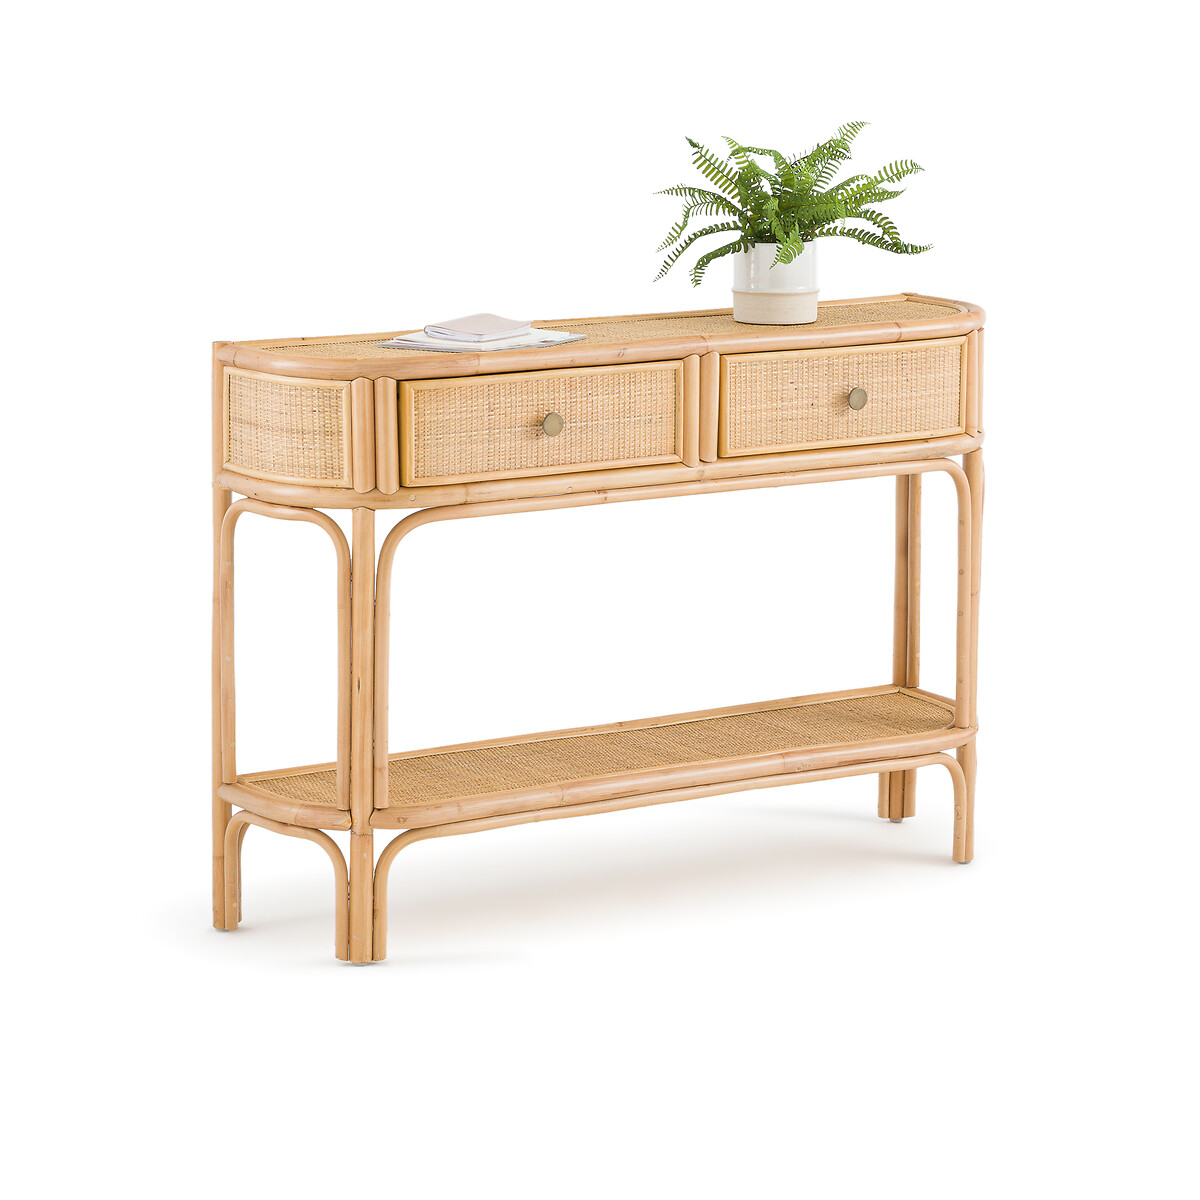 Ladara Rattan Console Table with Drawers